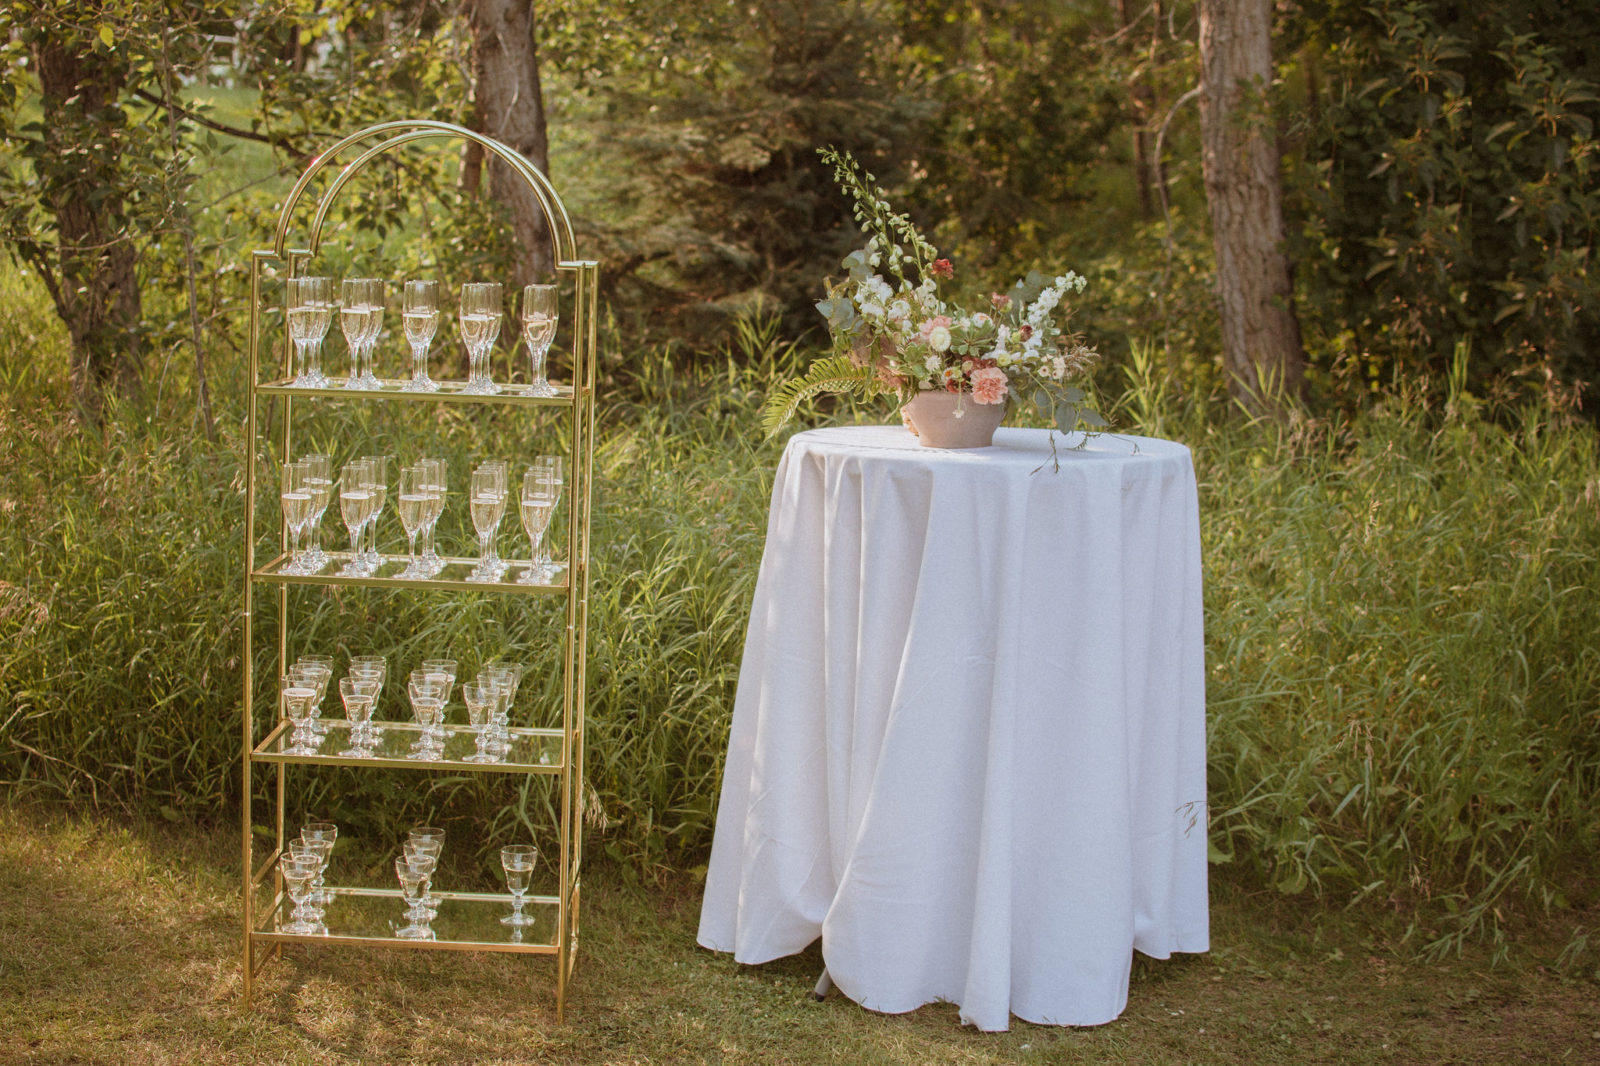 drink cart at outdoor summer wedding, arrival refreshments for wedding